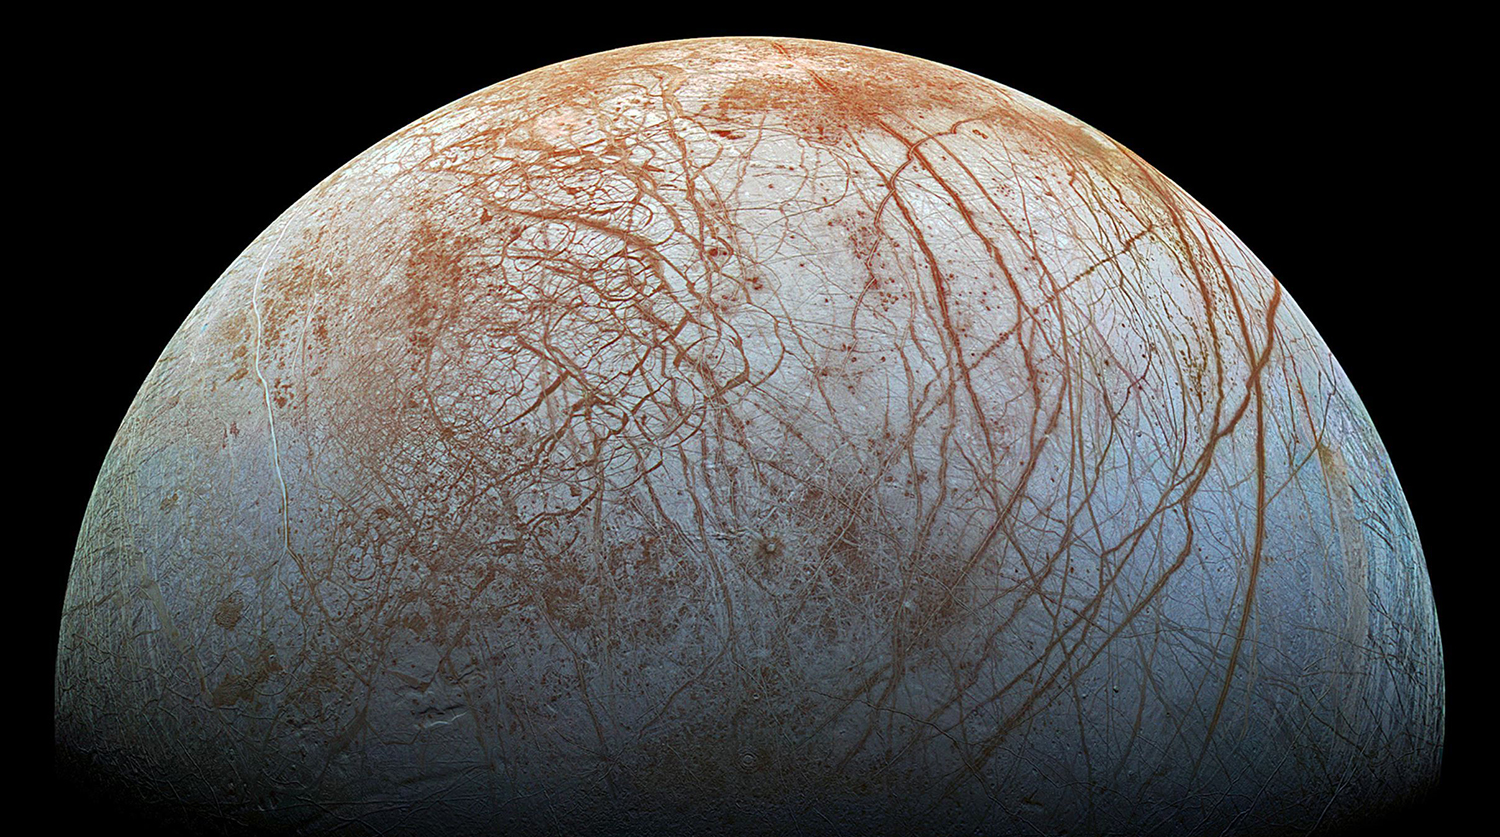 Scientists have a new theory about the distribution of oxygen and water in Europa's oceans. Credit: NASA